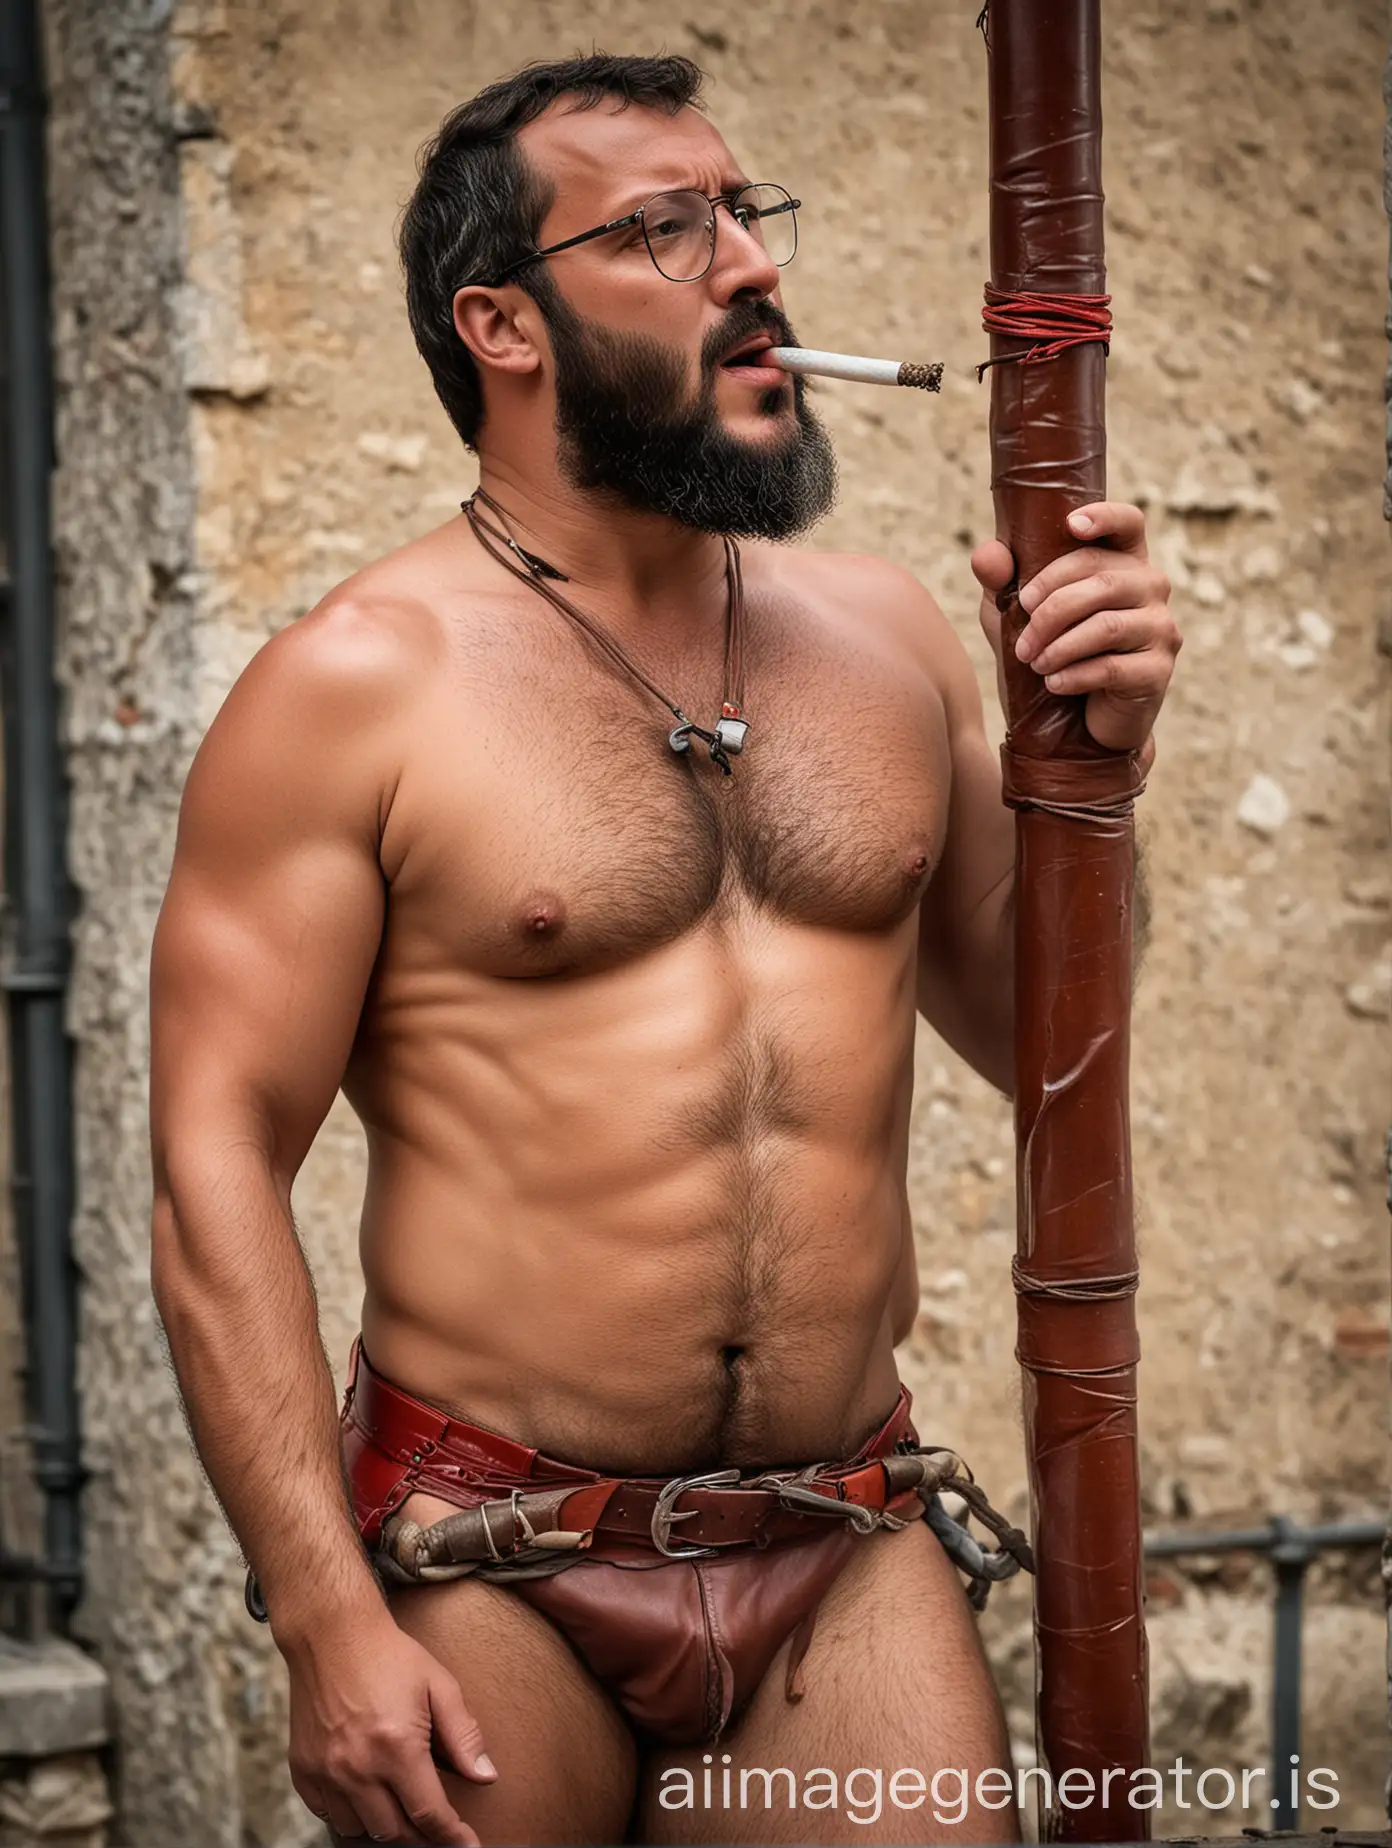 a manly ruggedly handsome Matteo Salvini  smoking a big cigar muscled and bearded bound tied handcuffed hit by two men hanging to a pole, red leather tight dressed wearing glasses